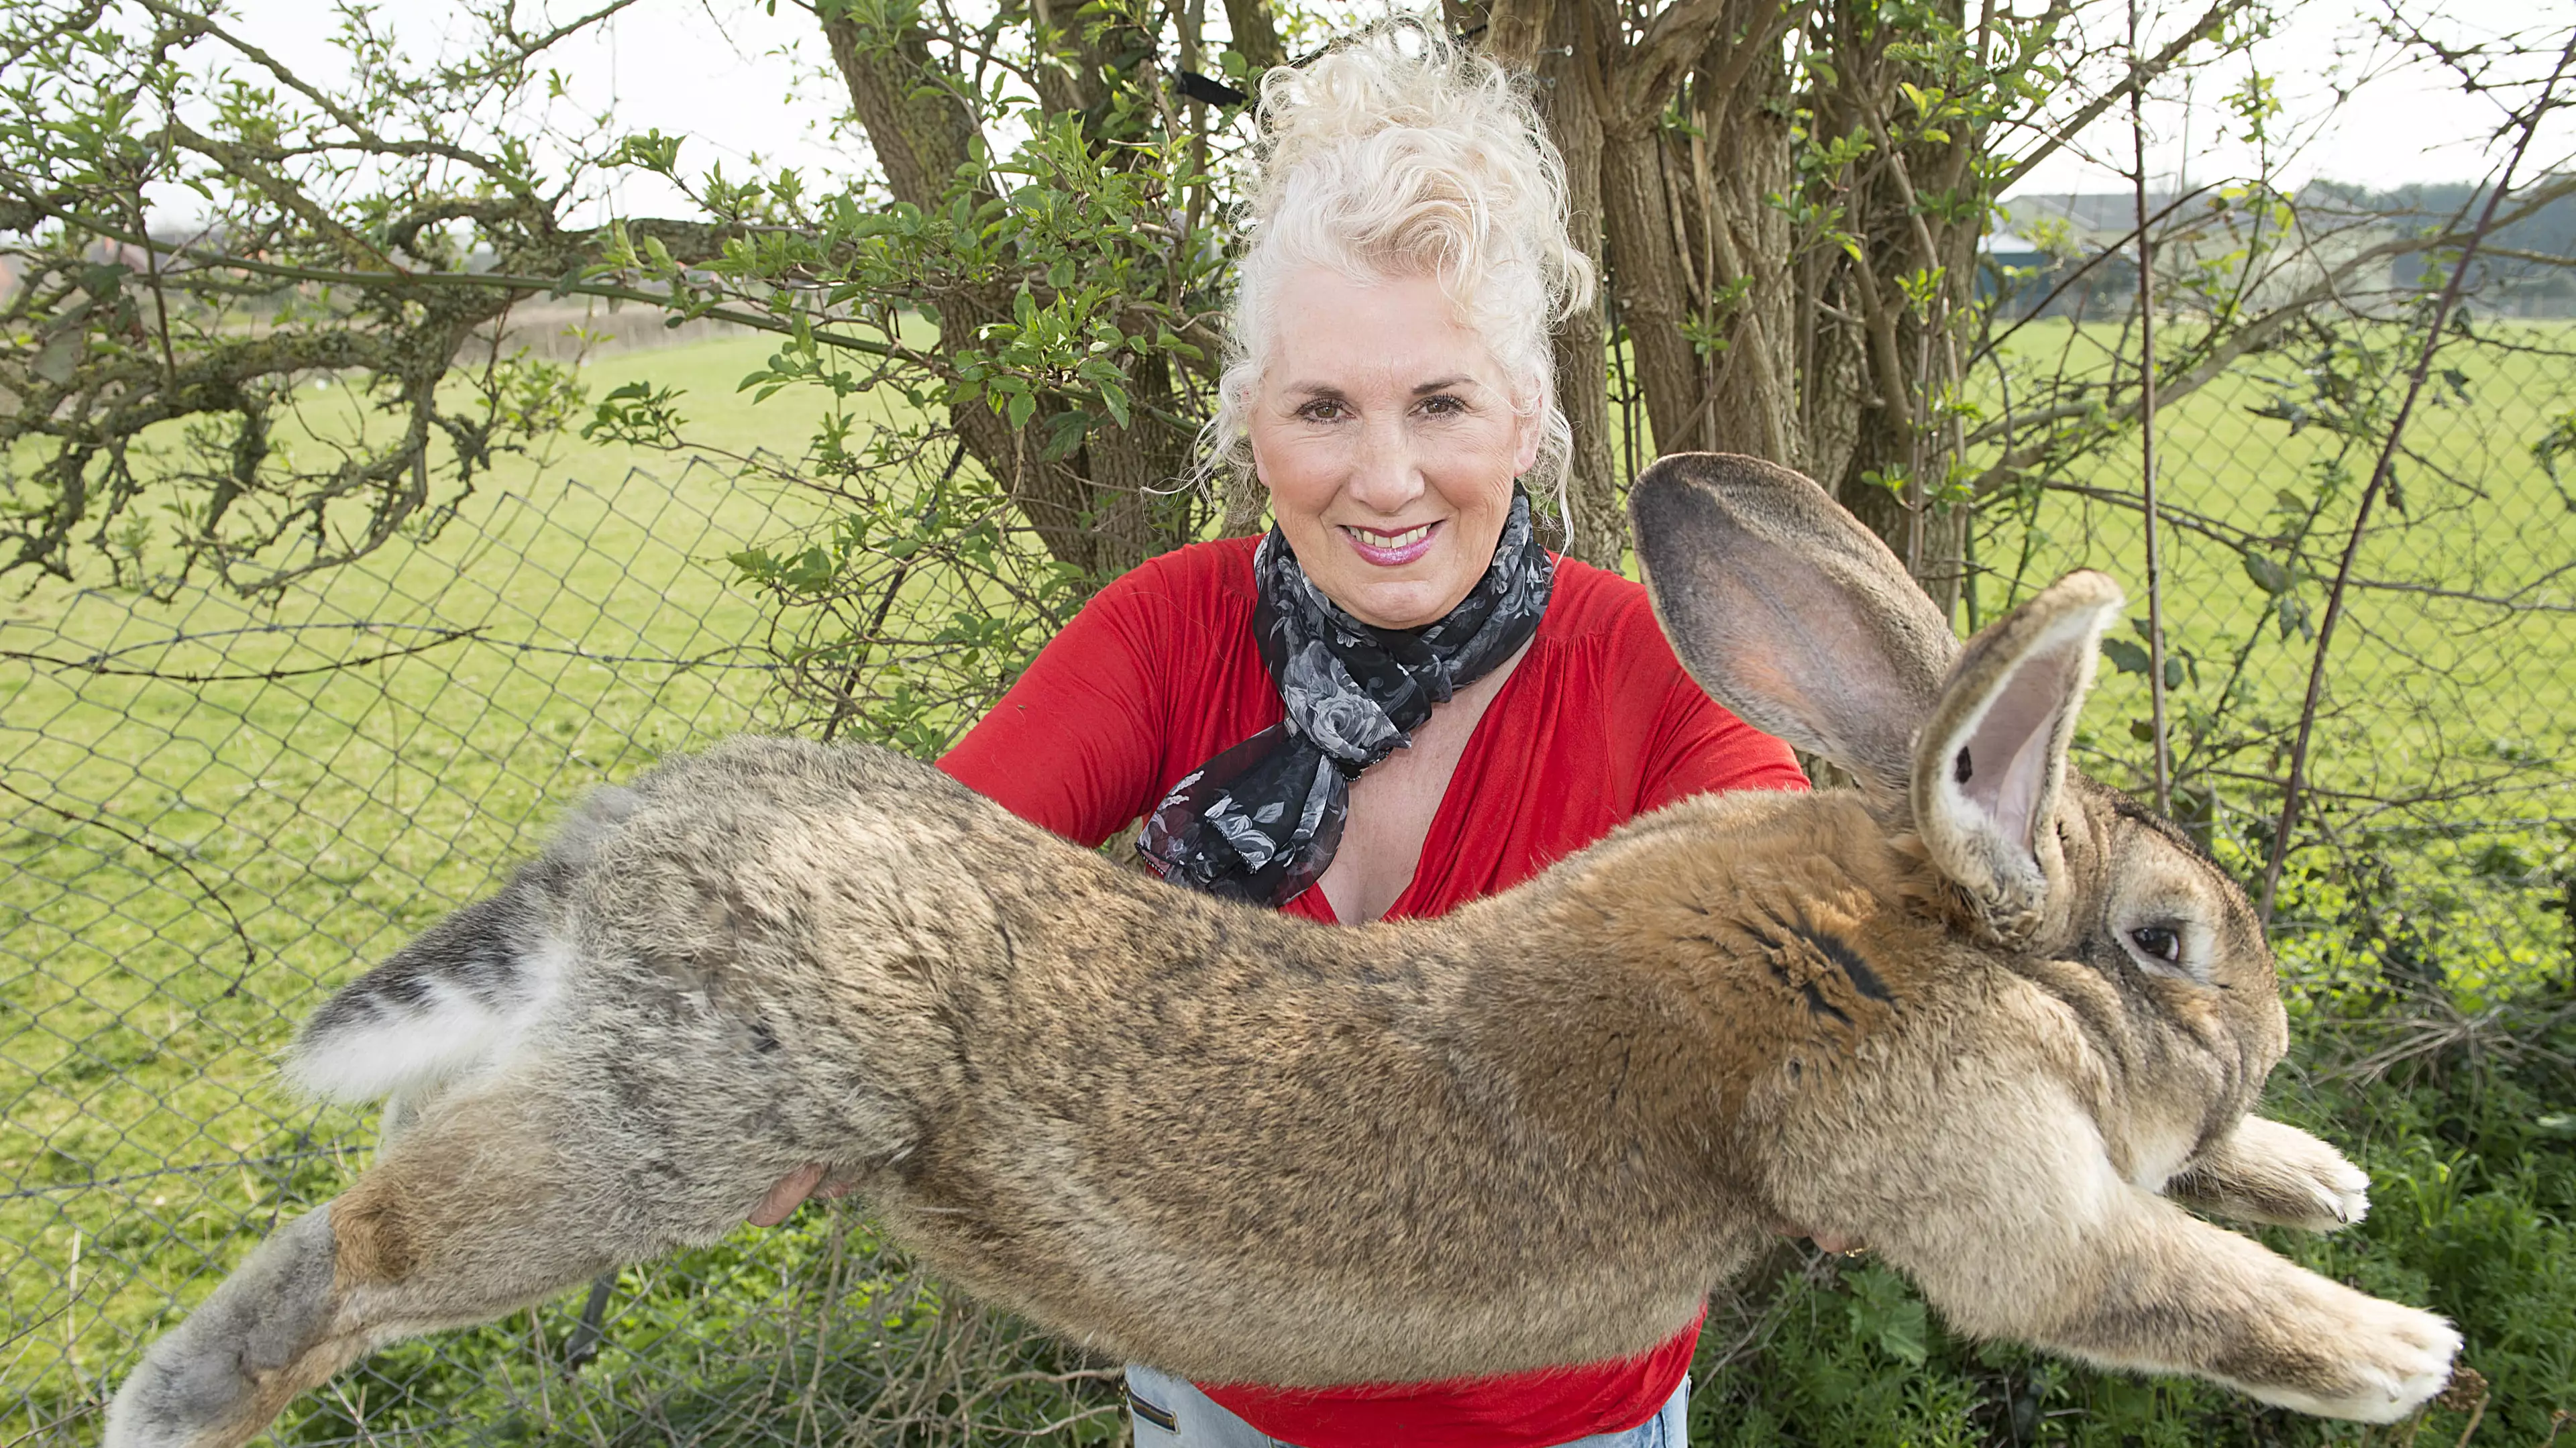 World's Biggest Bunny Stolen From Ex-Playboy Model Who Is Offering £1,000 Reward For Return